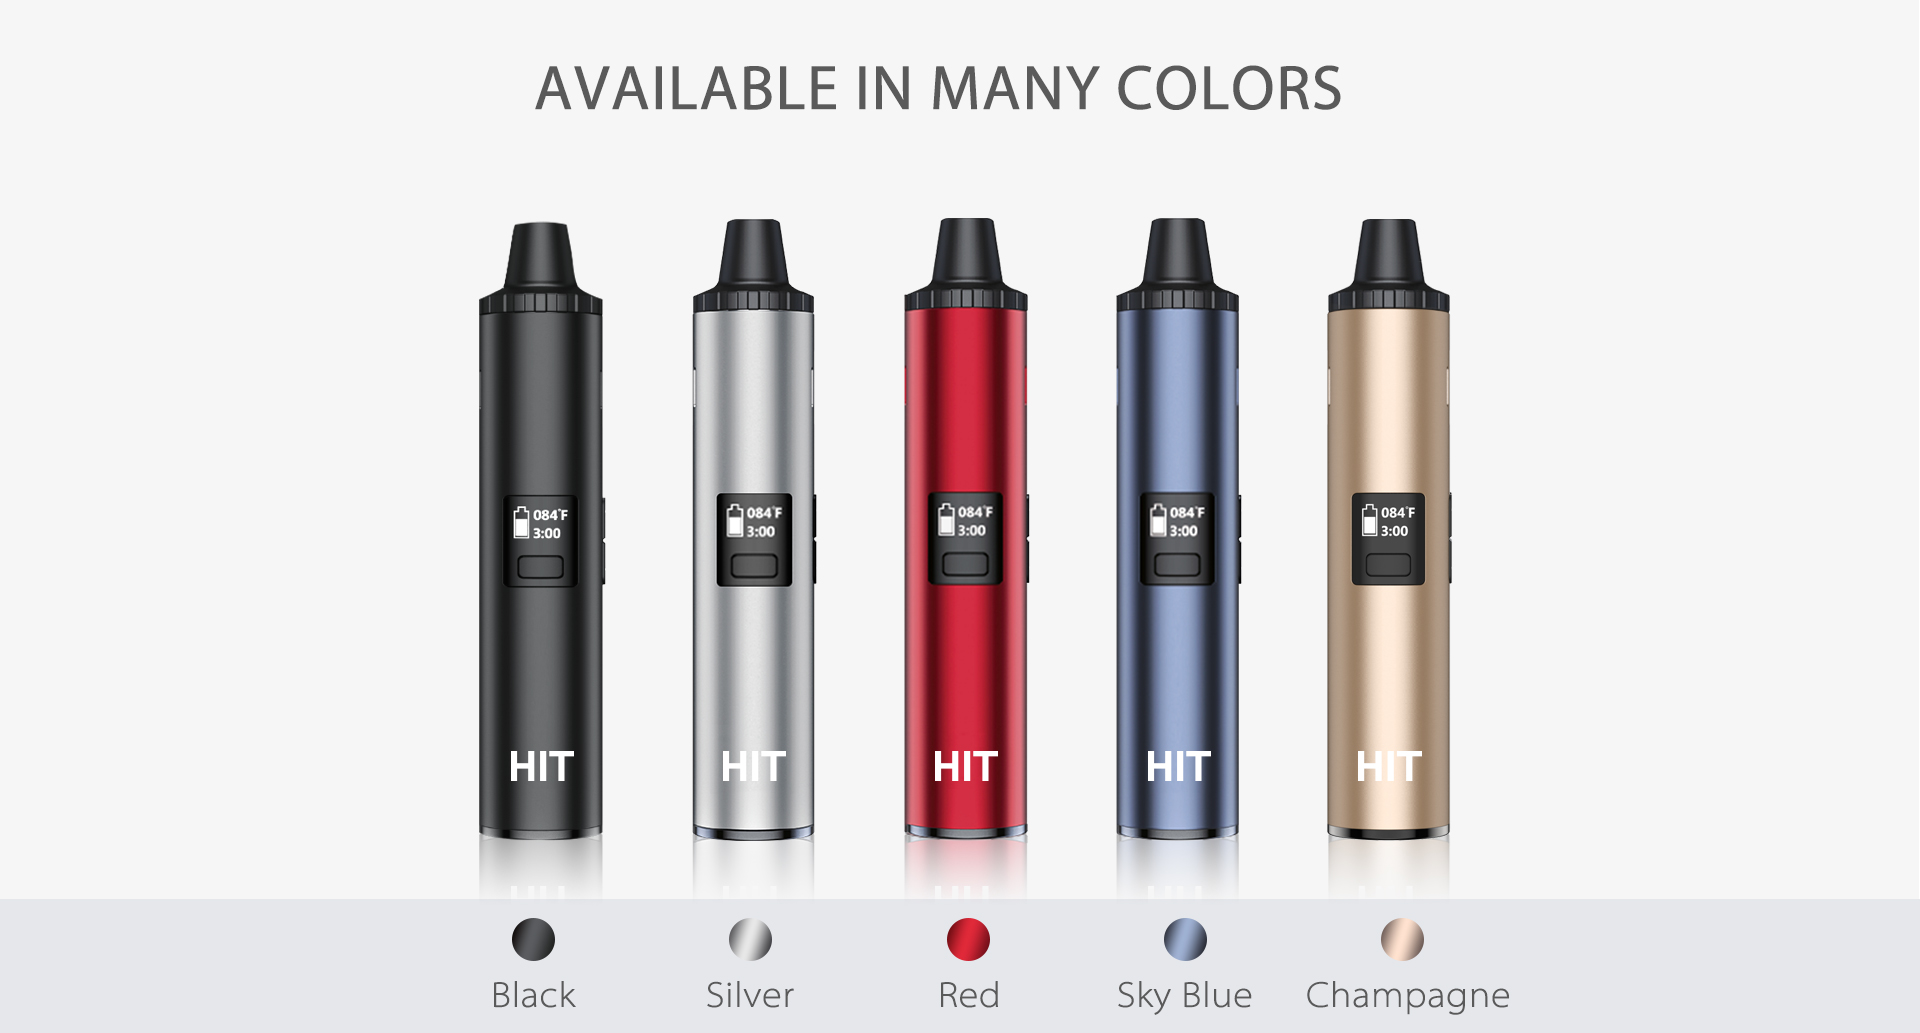 Yocan Hit Vaporizer Pen comes with 5 colors.